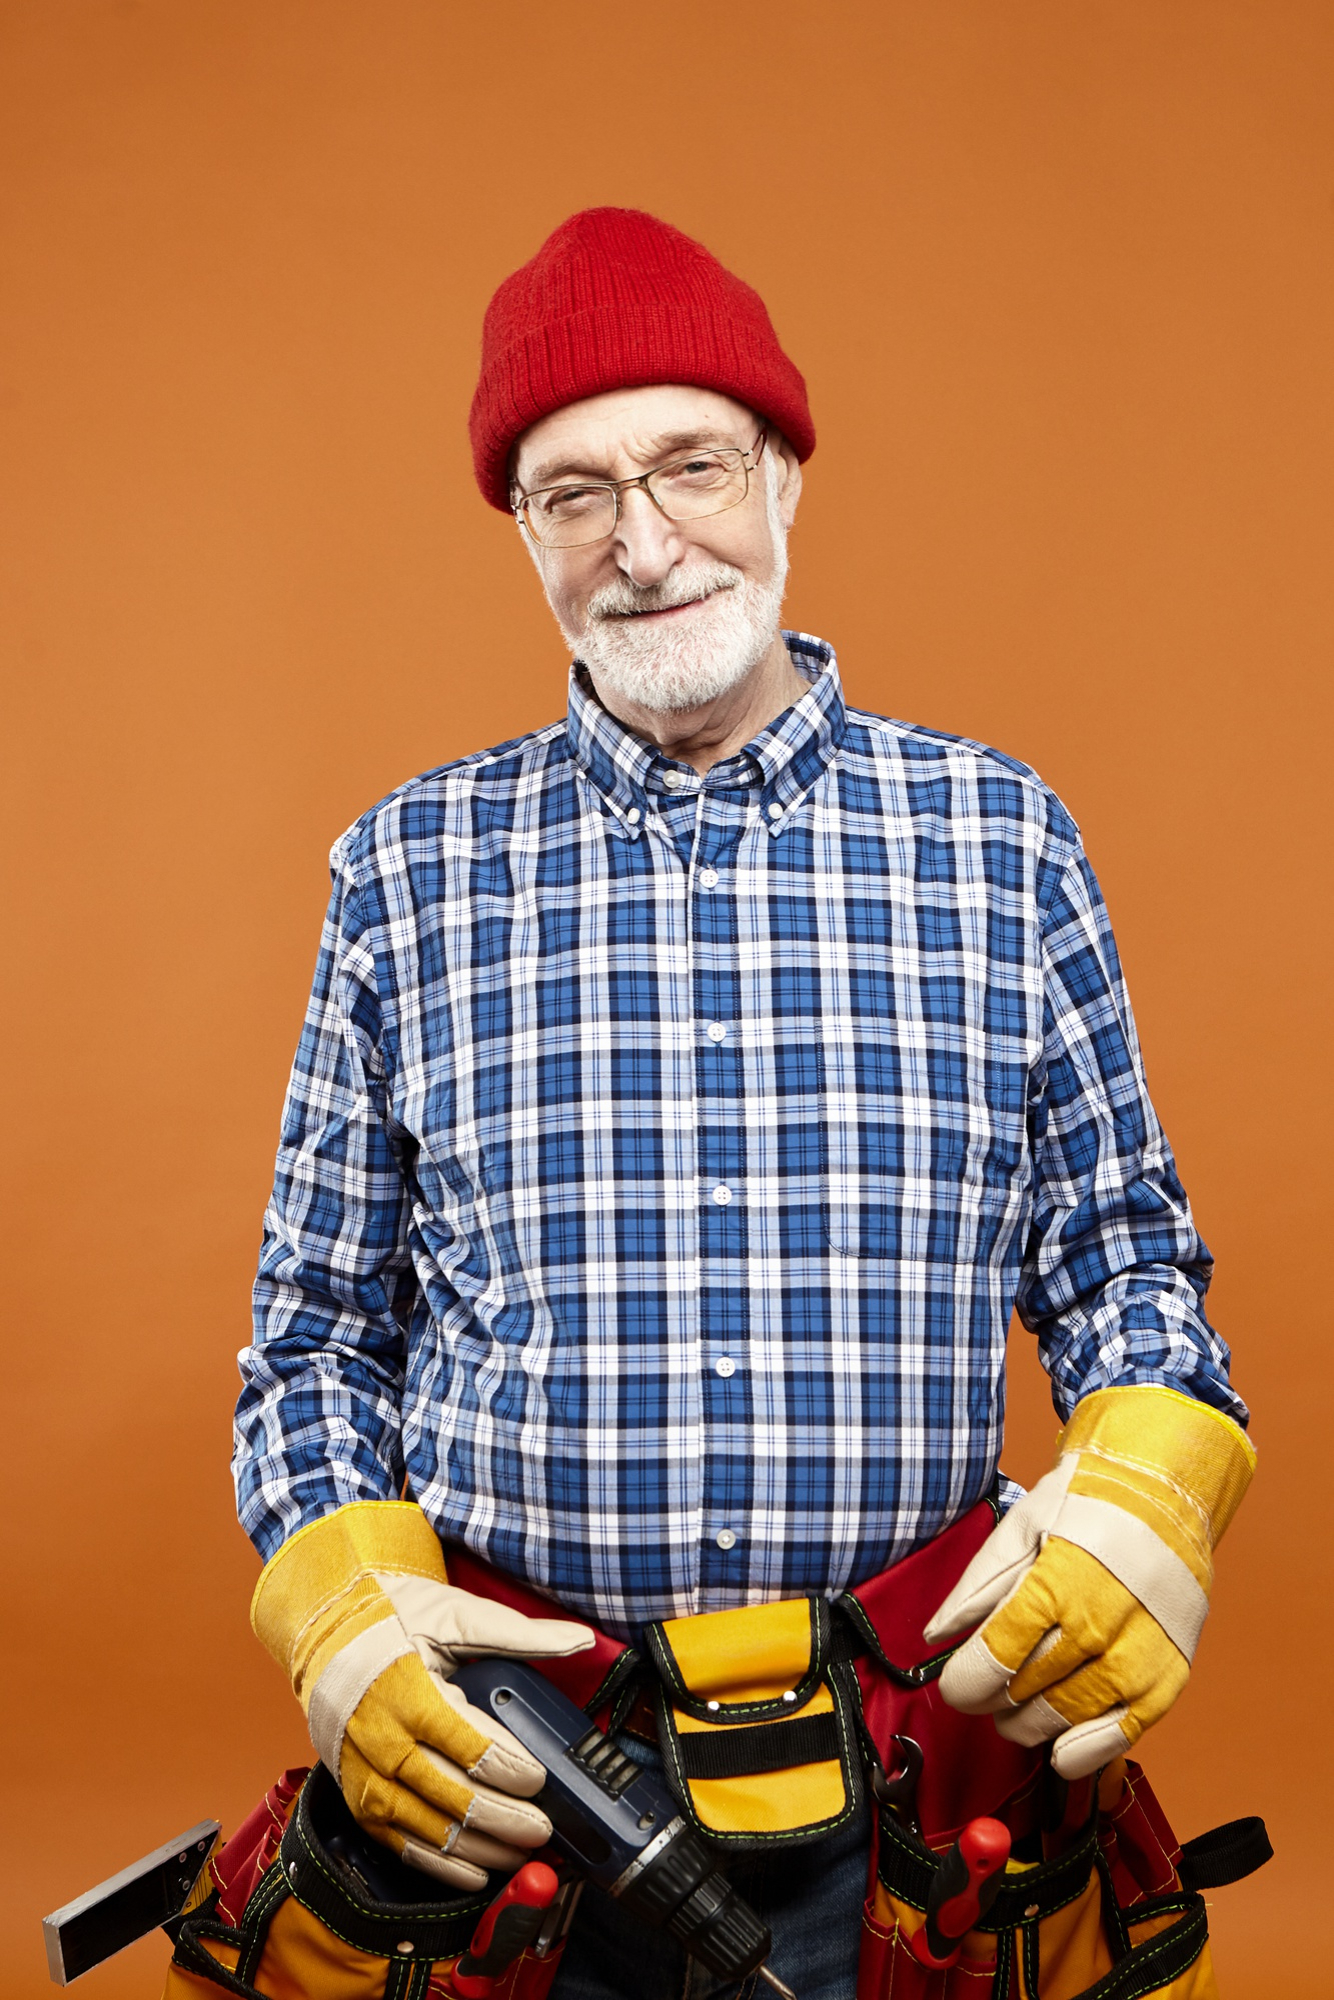 A happy middle-aged man wearing a toolbelt and holding tools | Source: Freepik